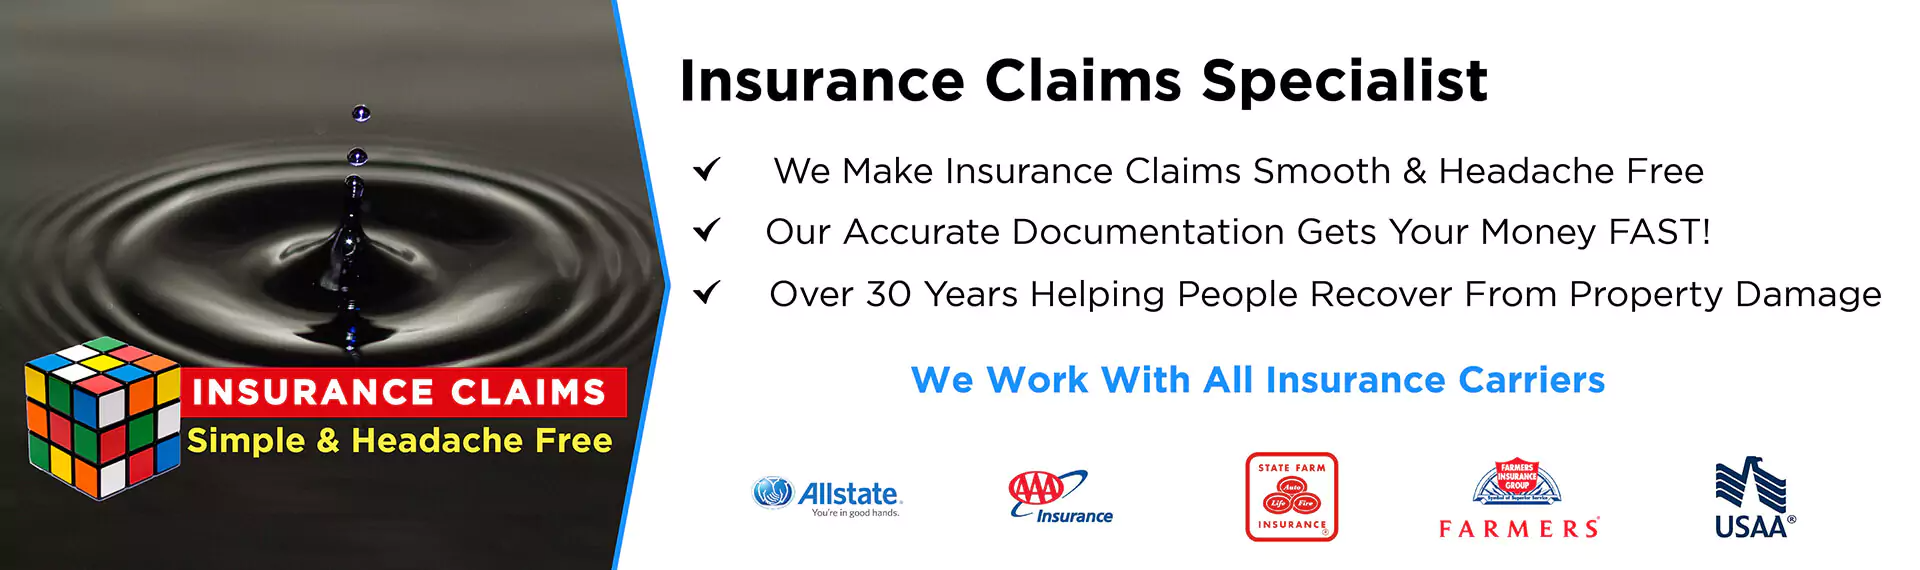 We specialize in insurance claims when you need water damage restoration in Berkley, MI